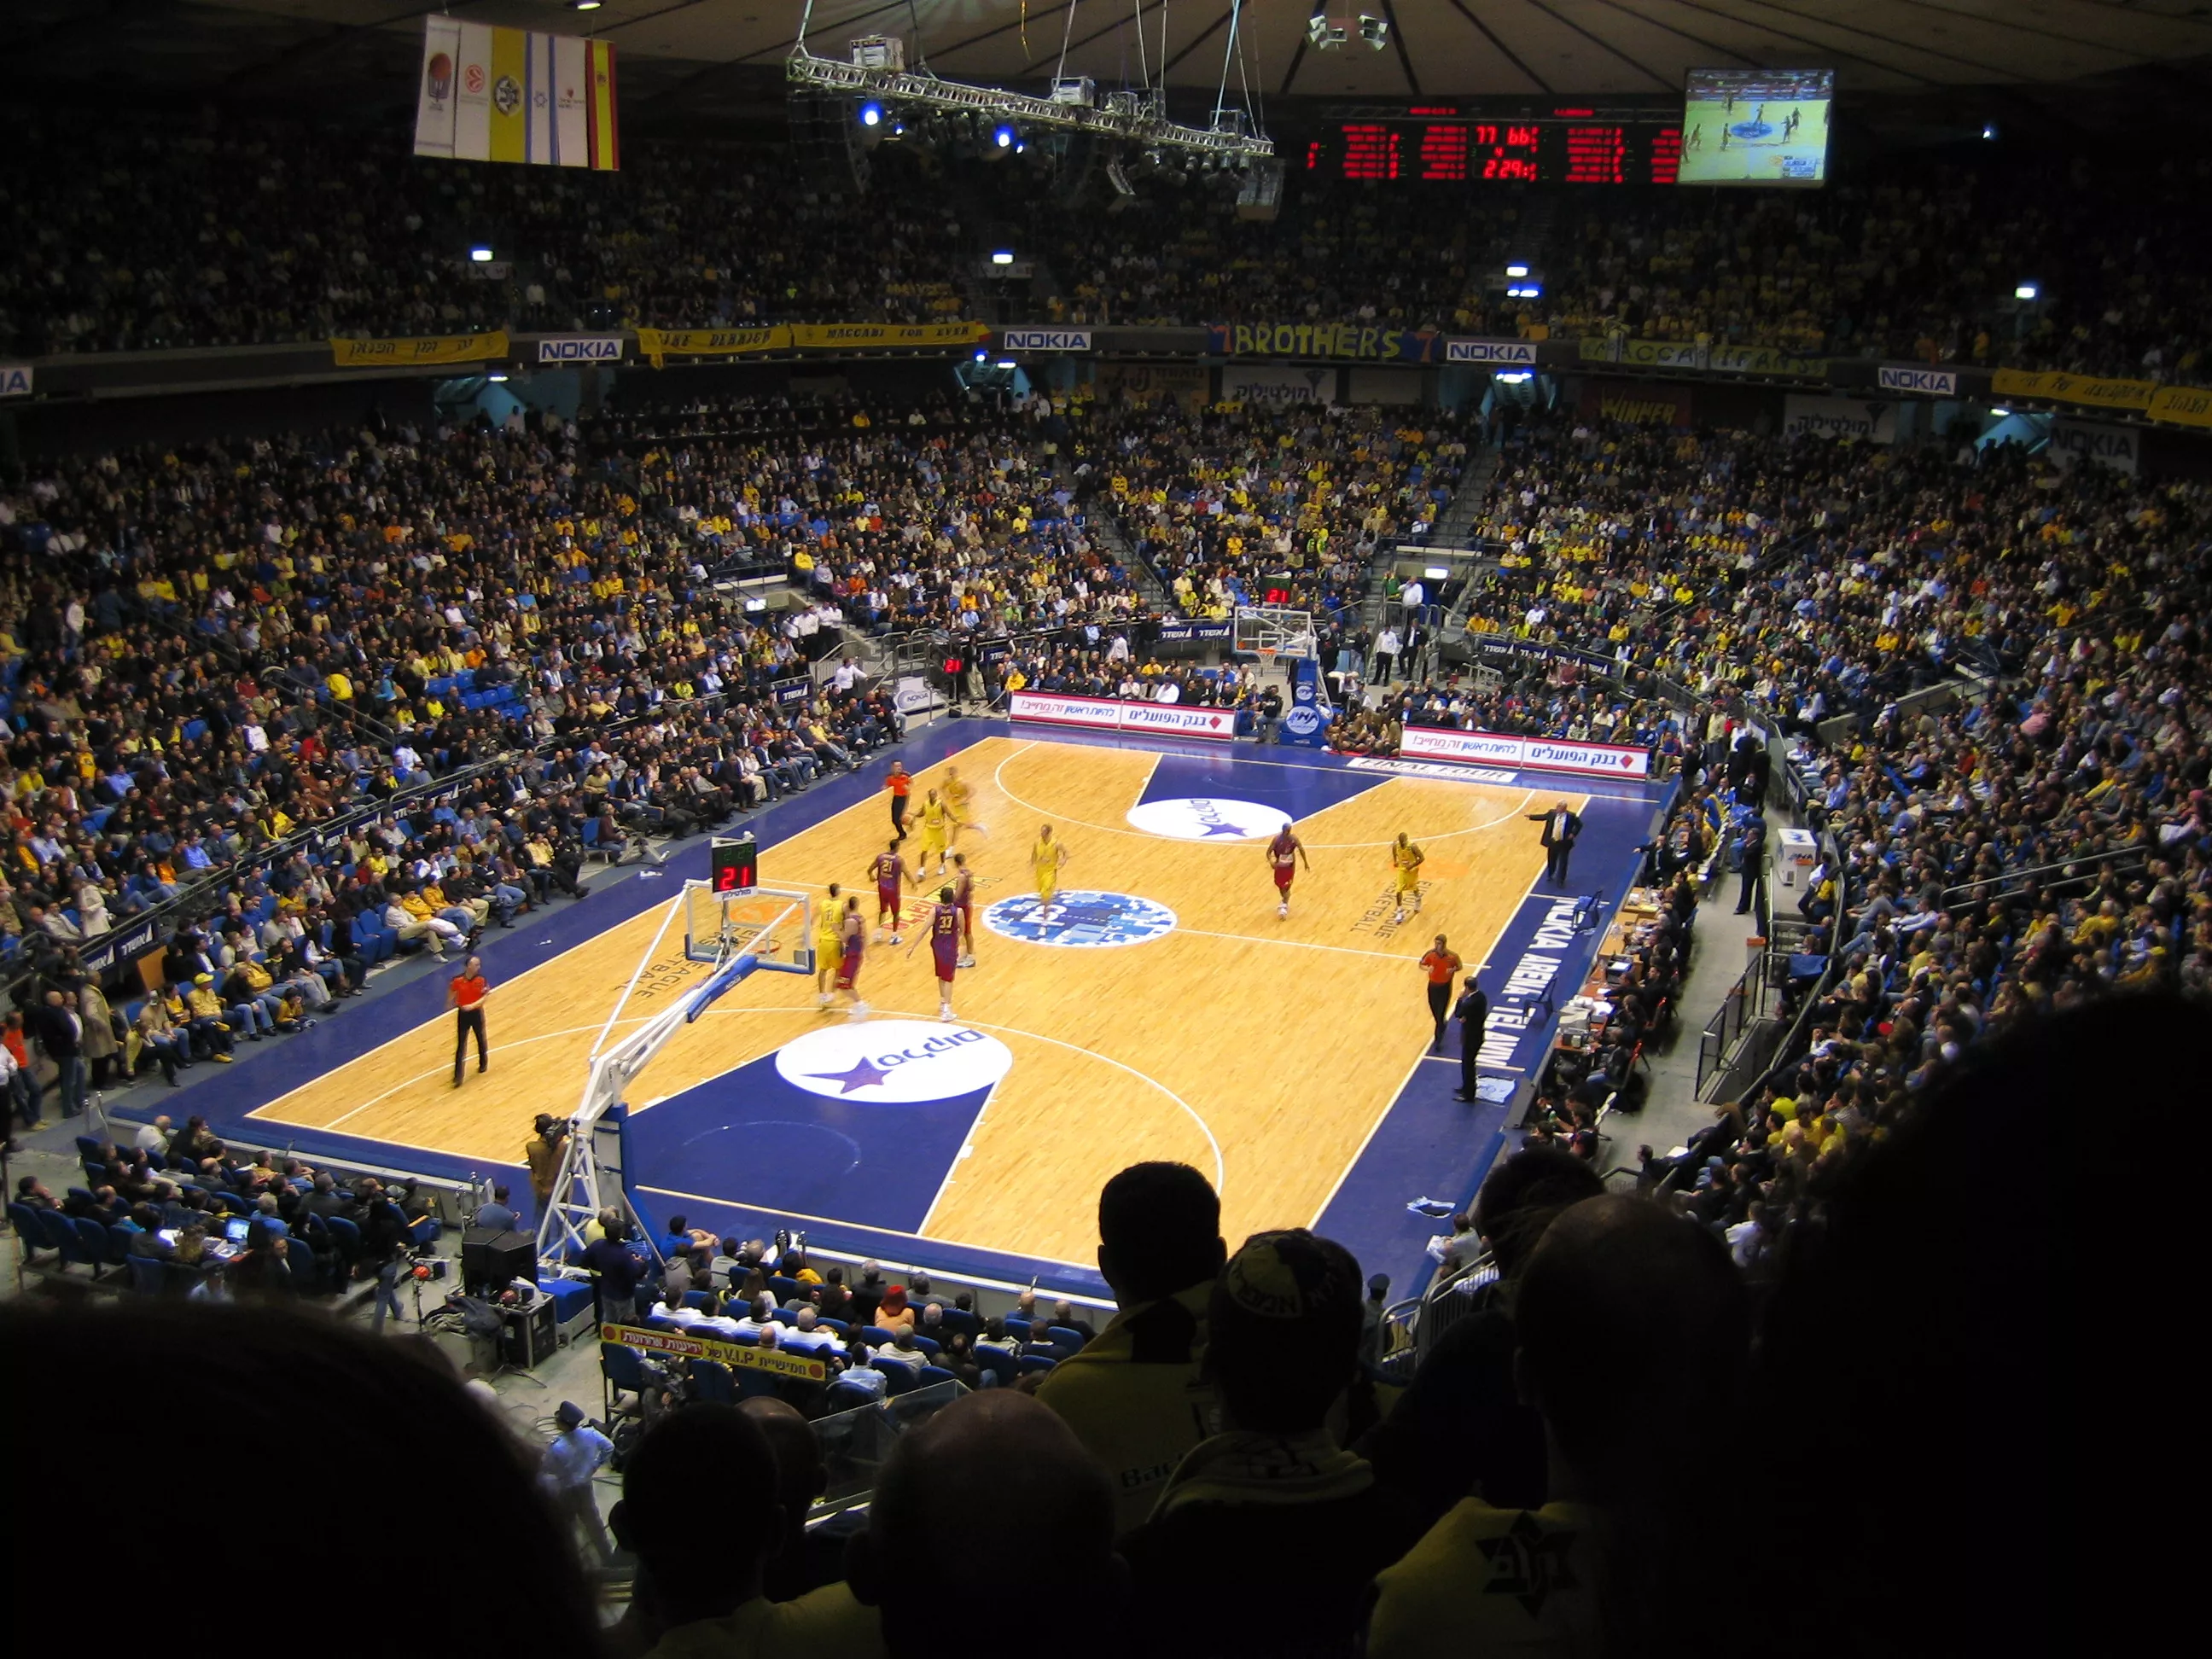 Menora Mivtachim Arena in Israel, Middle East | Basketball - Rated 5.1